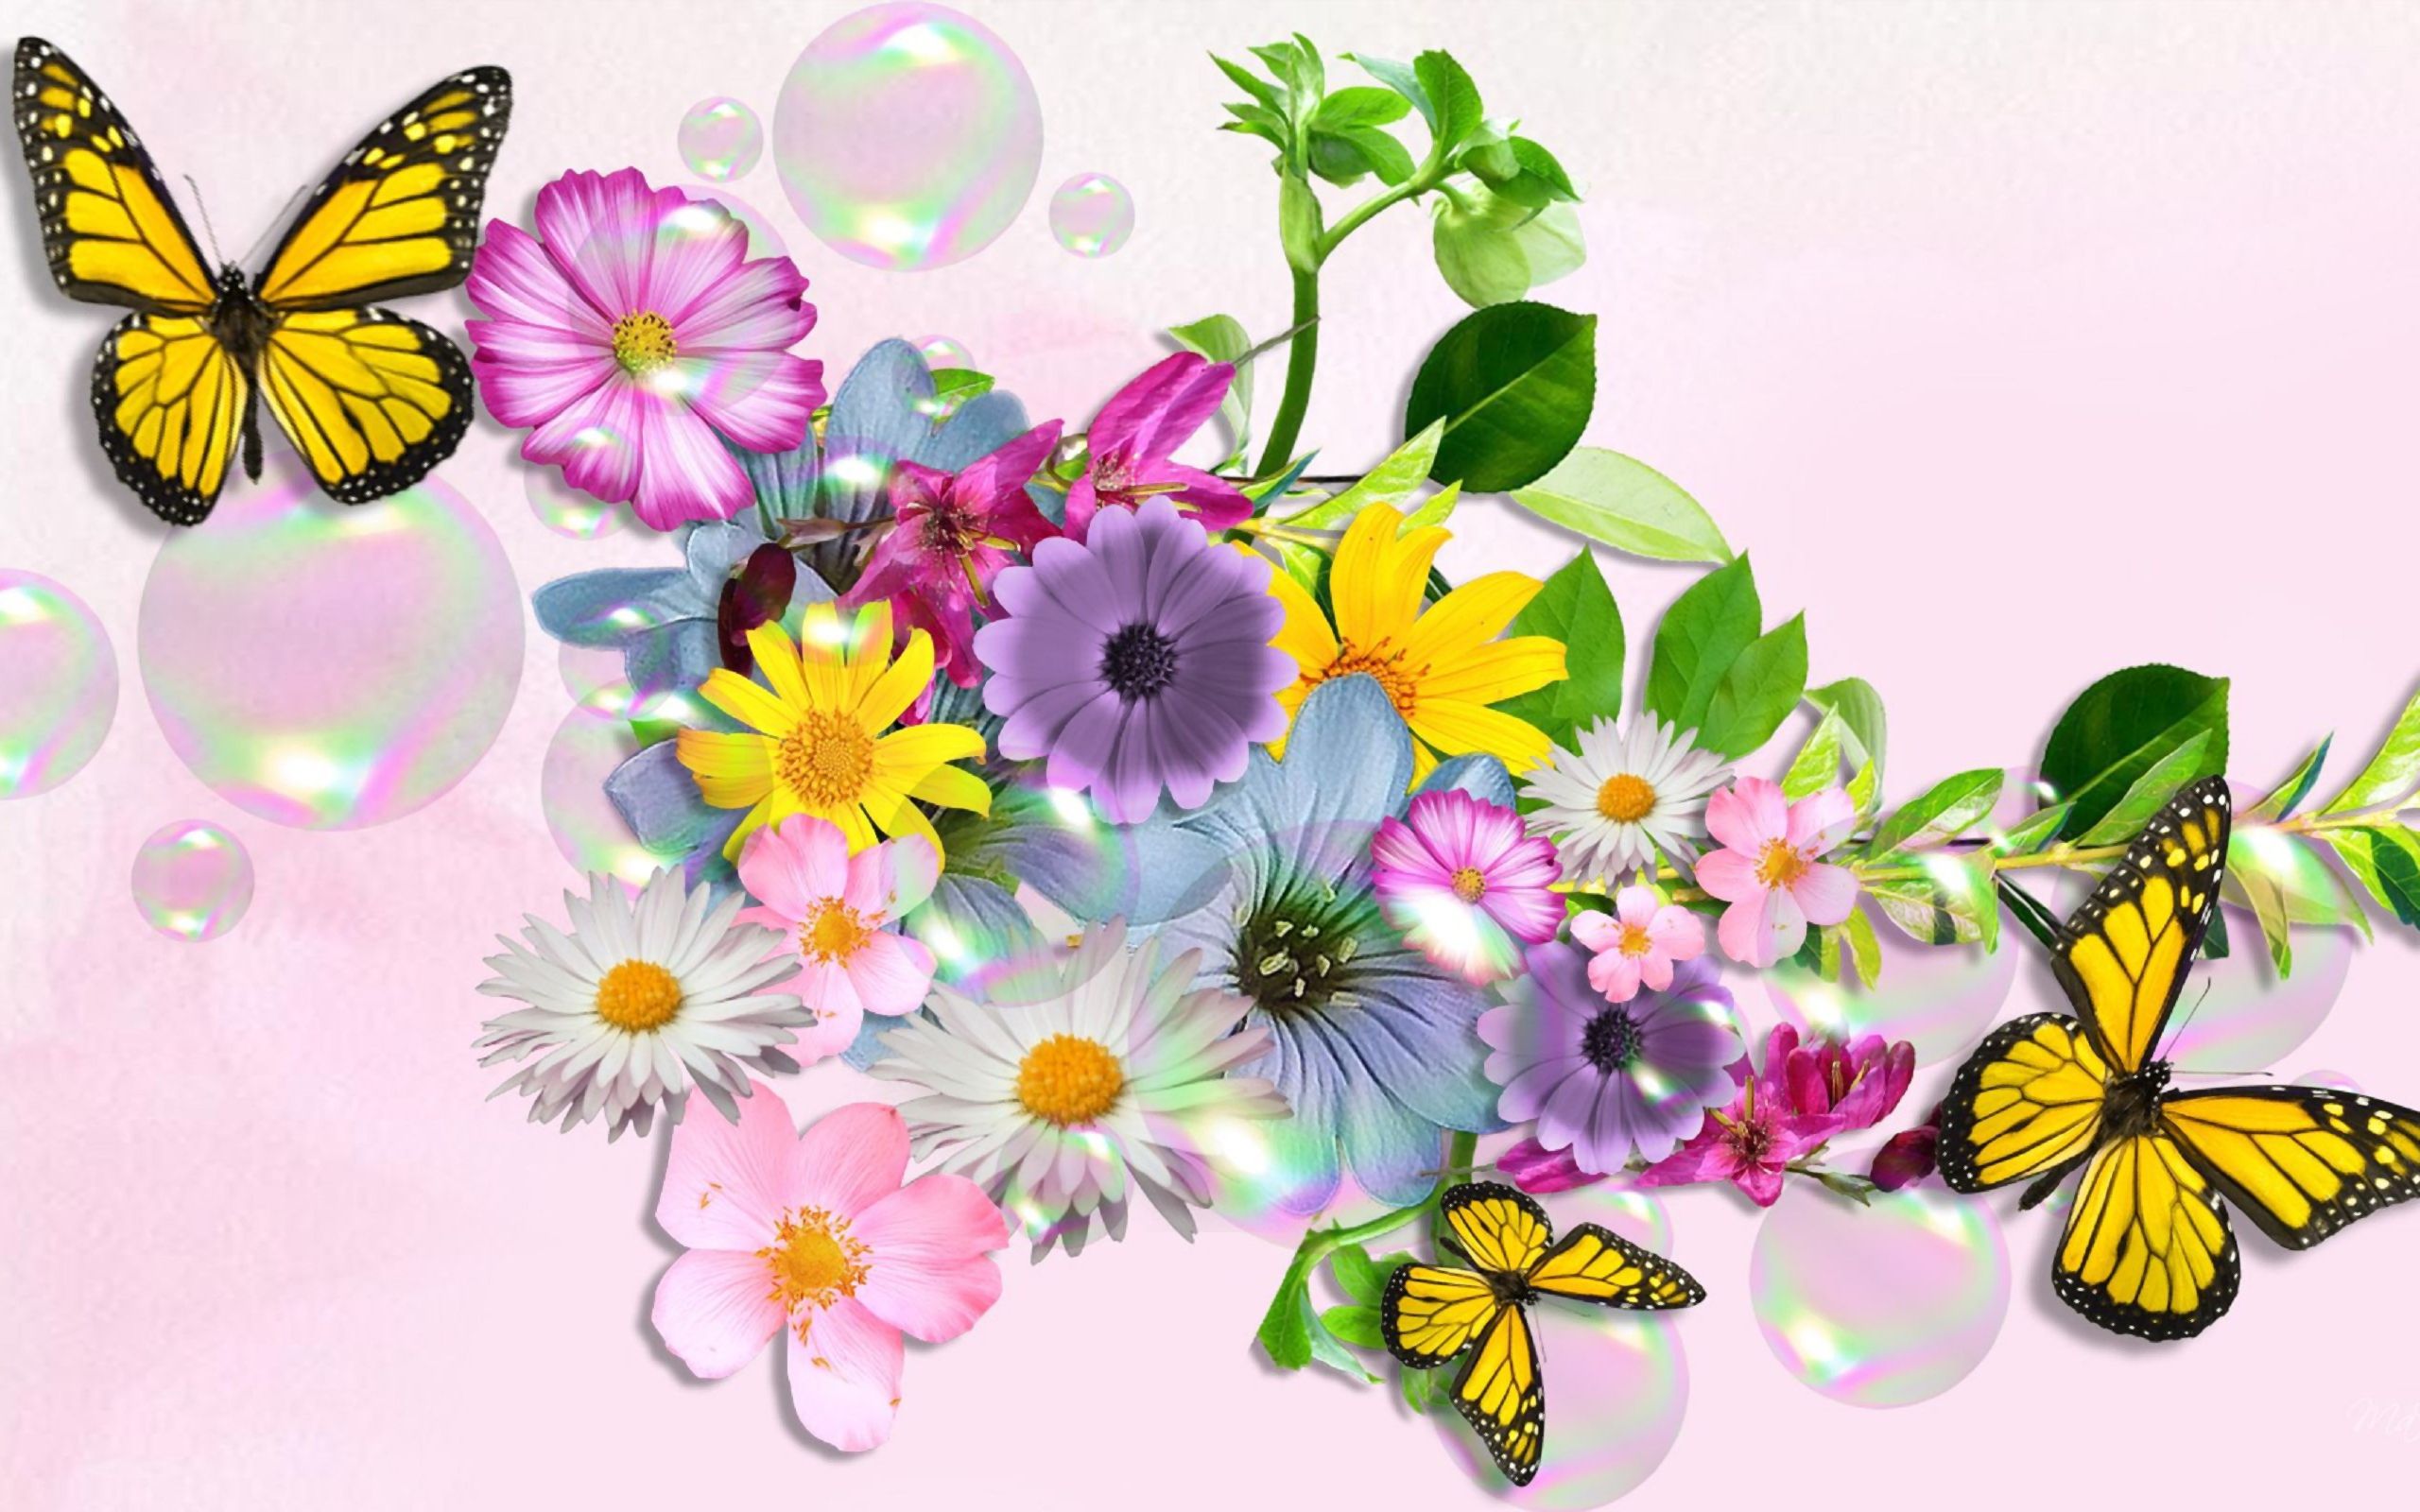 wallpapers of flowers and butterflies